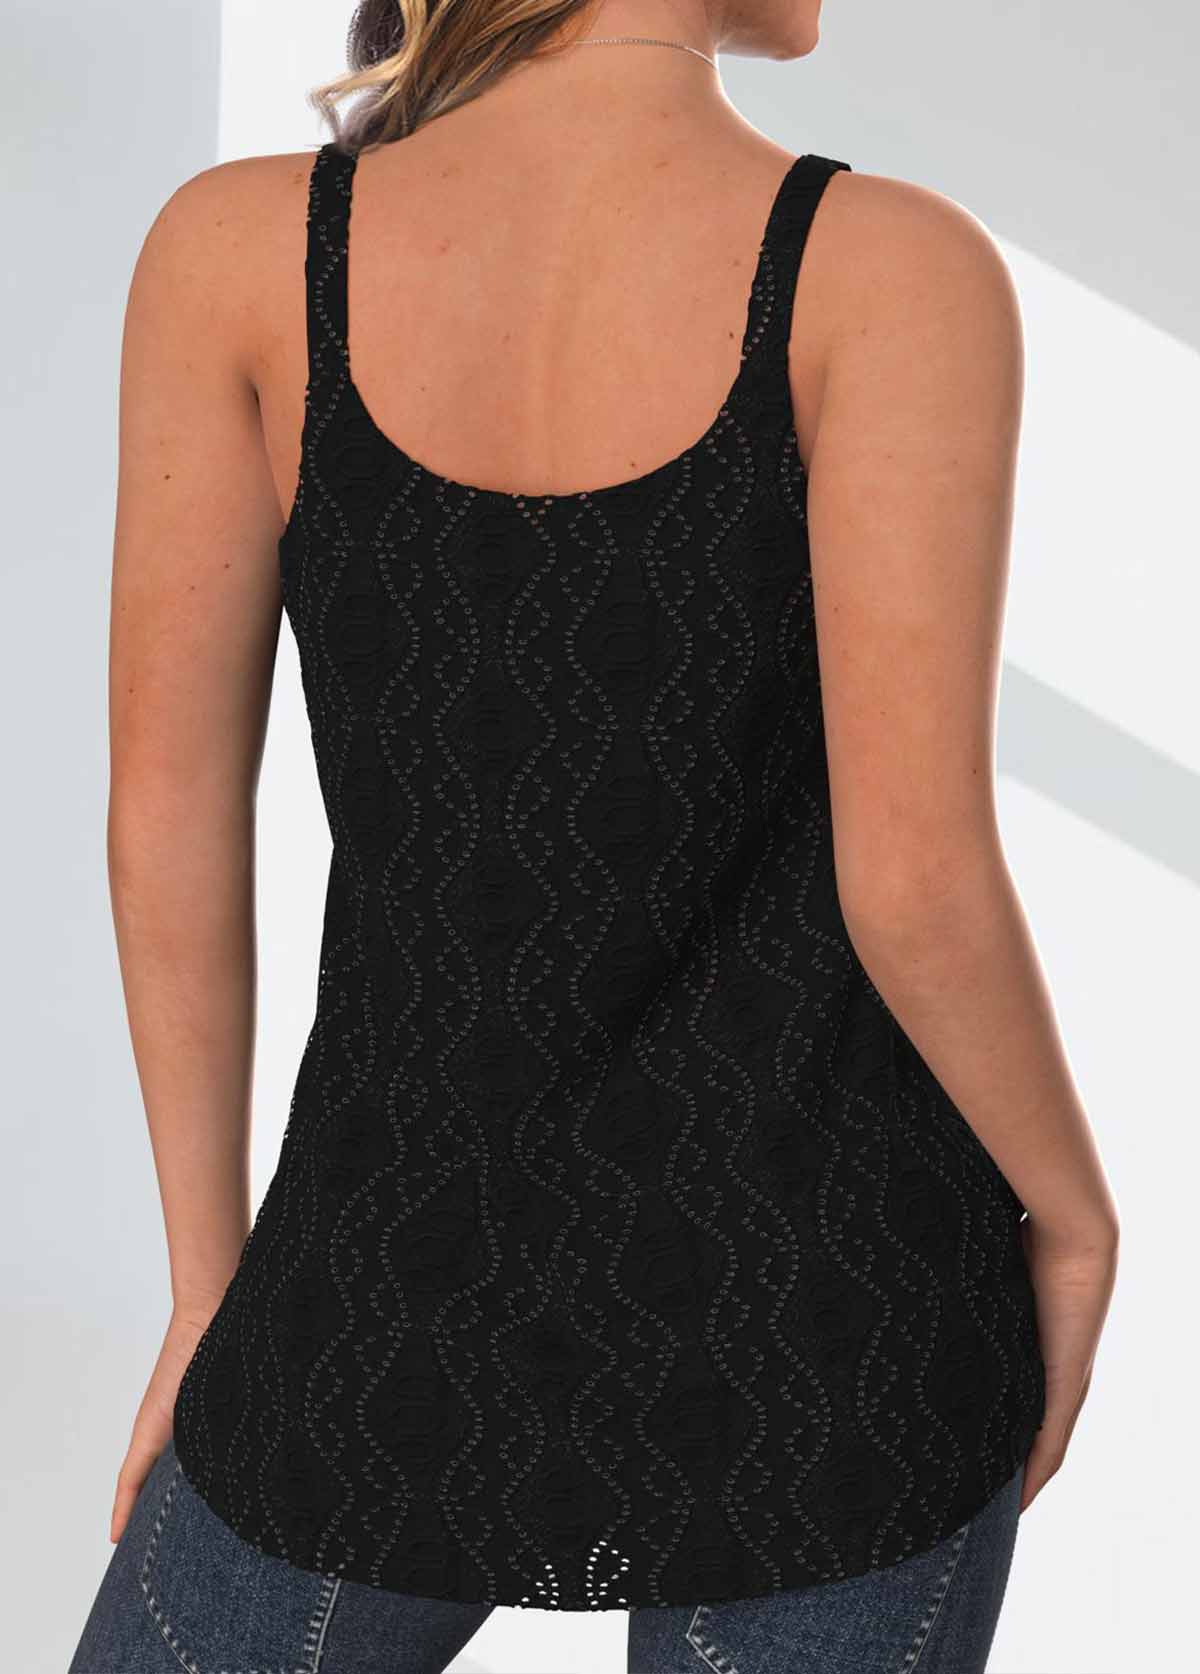 Black Textured Fabric Strappy V Neck Camisole Top